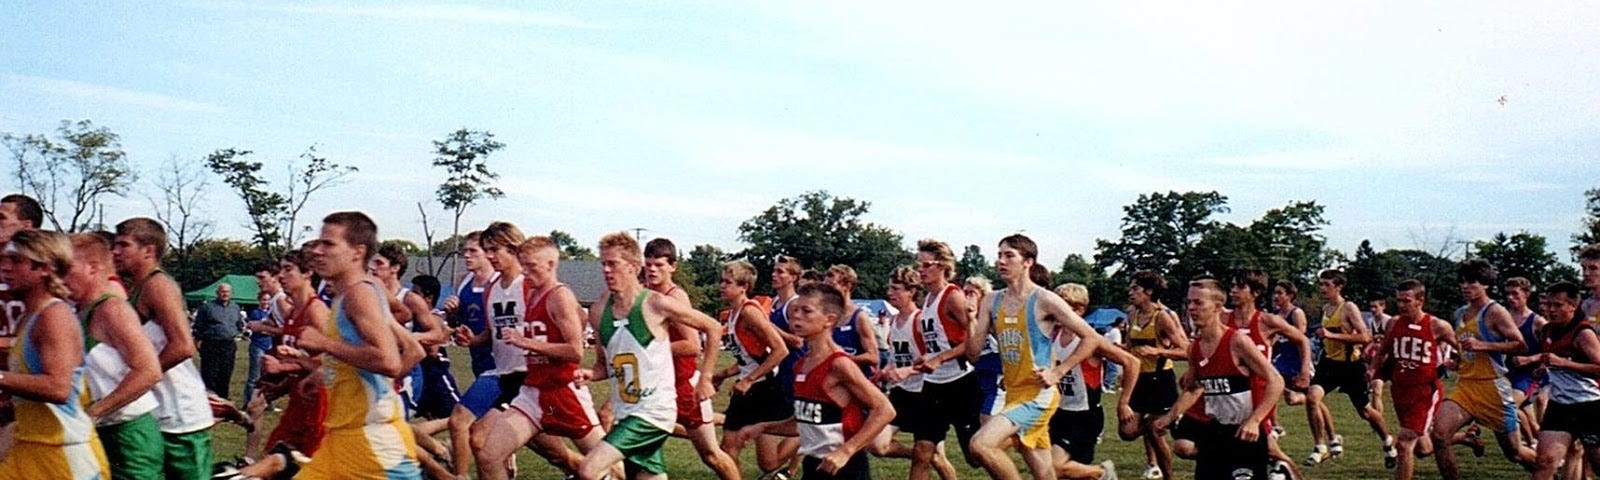 Luke Brenneman as a teen, center in red and black, running amongst many other teens, but very clearly smaller in stature.